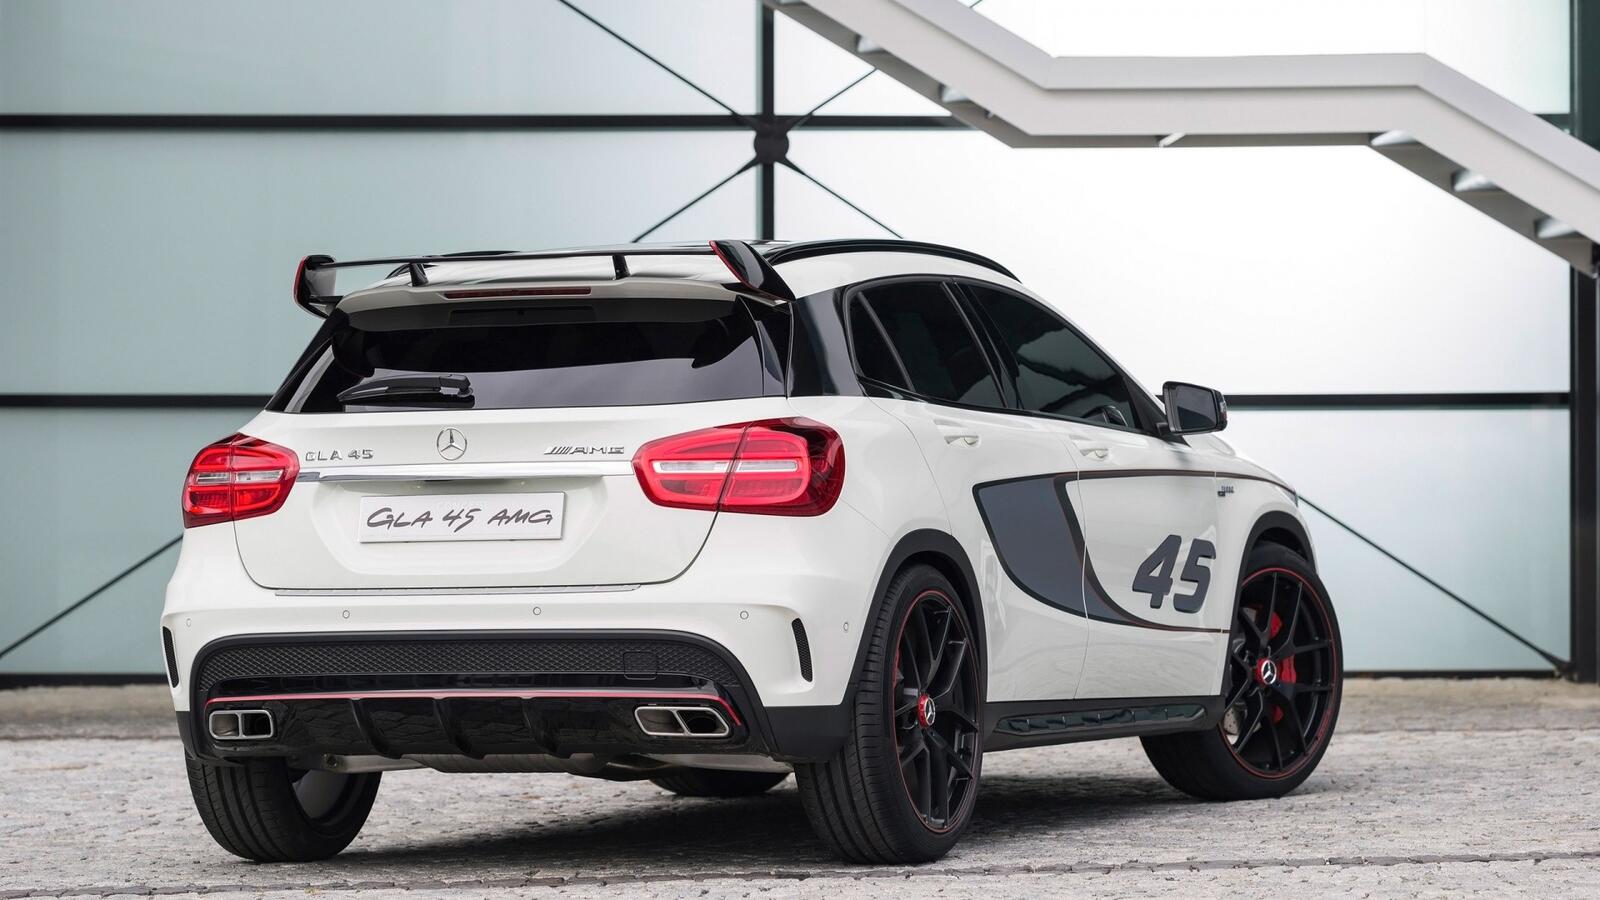 Wallpapers car gla 45 amg cars on the desktop